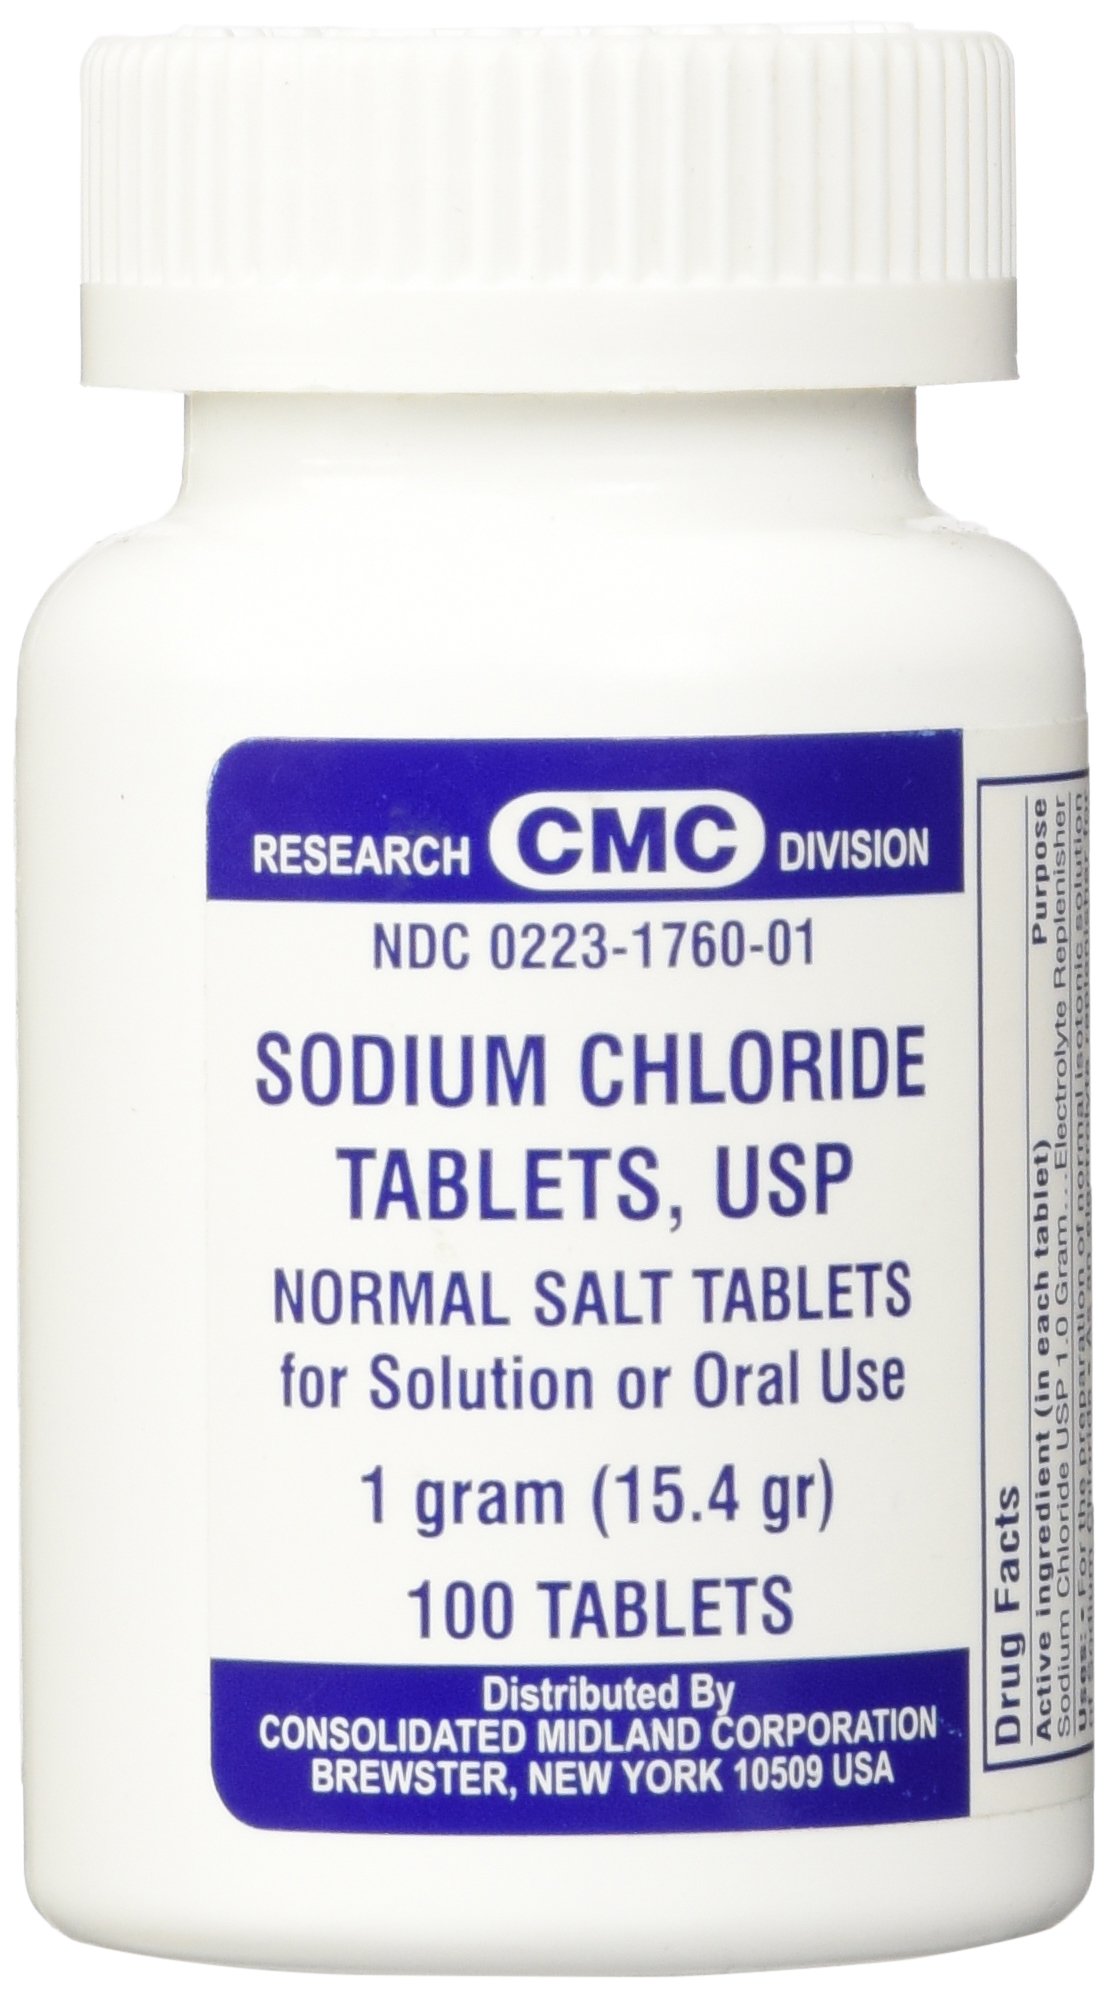 CONSOLIDATED MIDLAND CORP. Sodium Chloride Tablets 1 Gm, USP Normal Salt Tablets - 100 Tablets